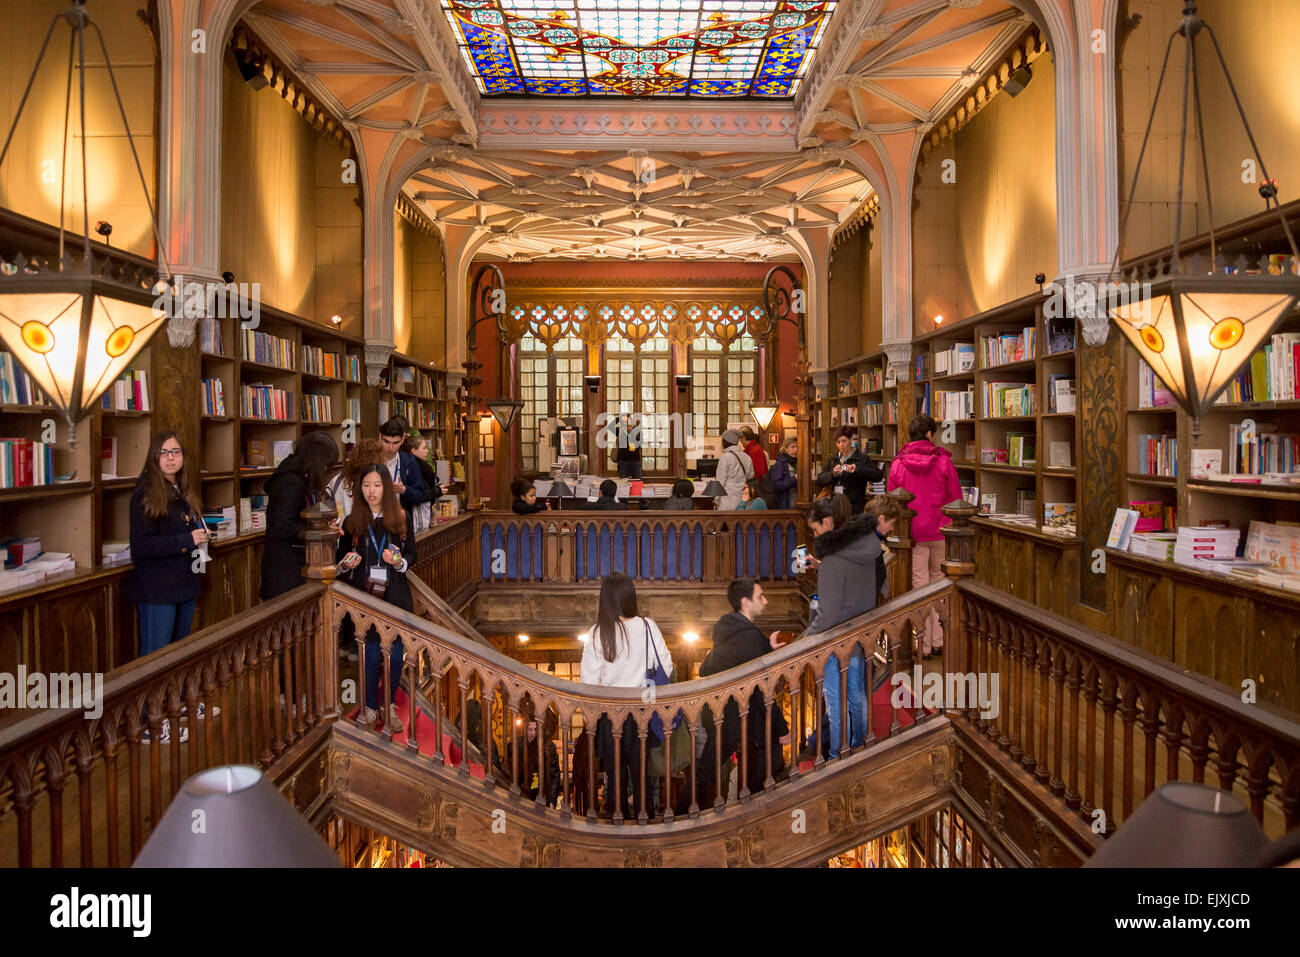 Tourists inside the lello library,Along with Bertrand in Lisbon, it